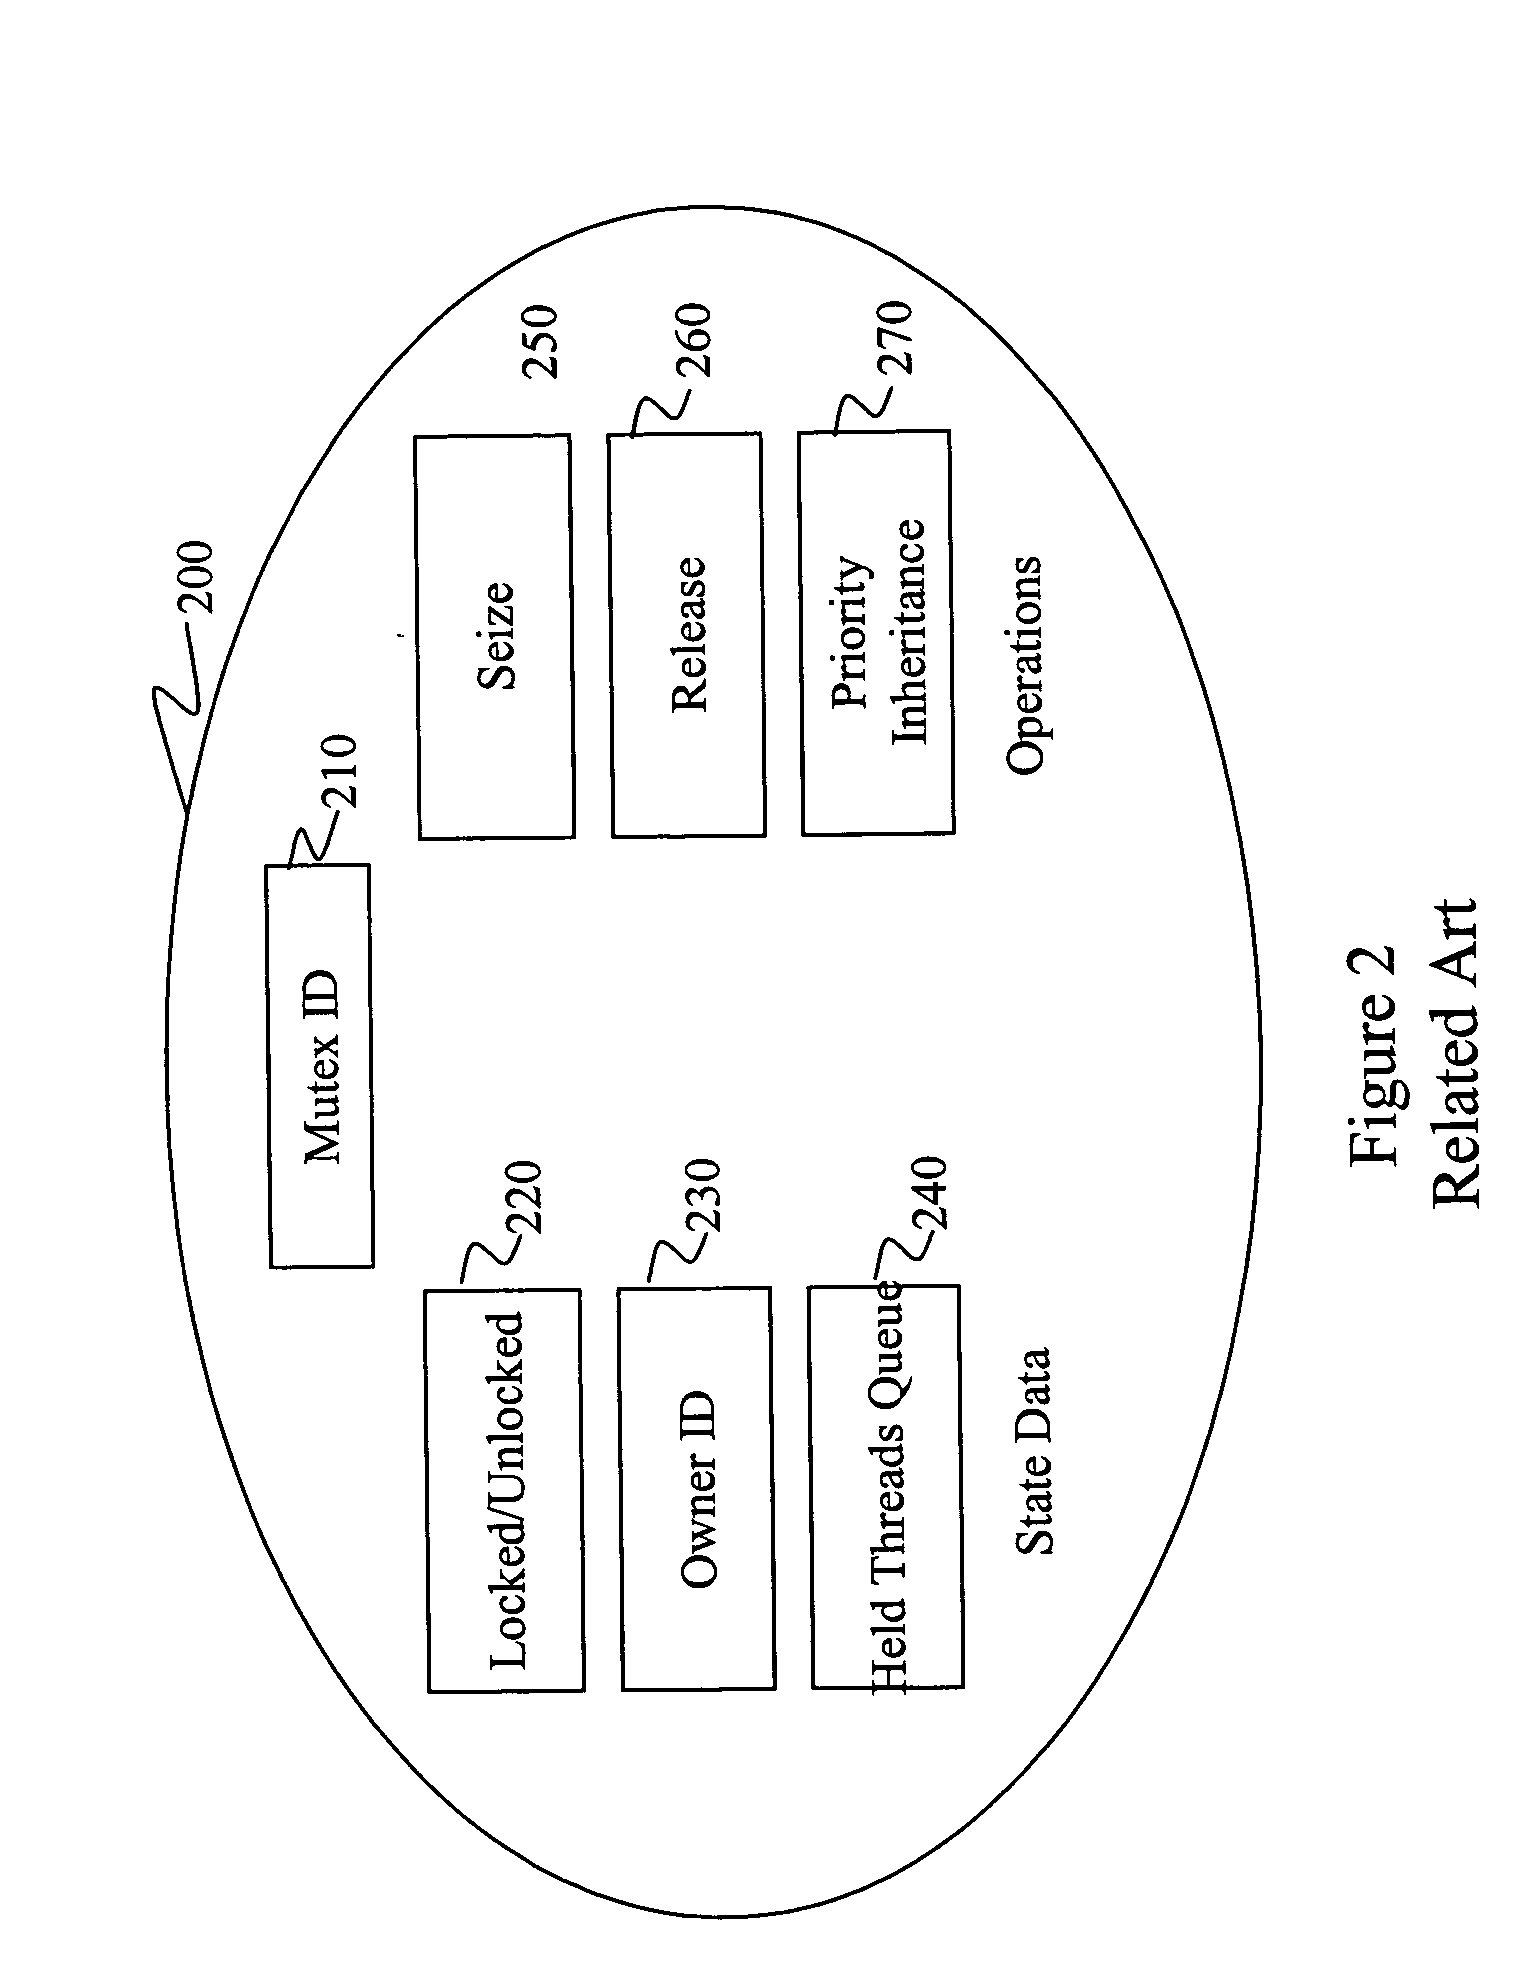 System and method for implementing distributed priority inheritance